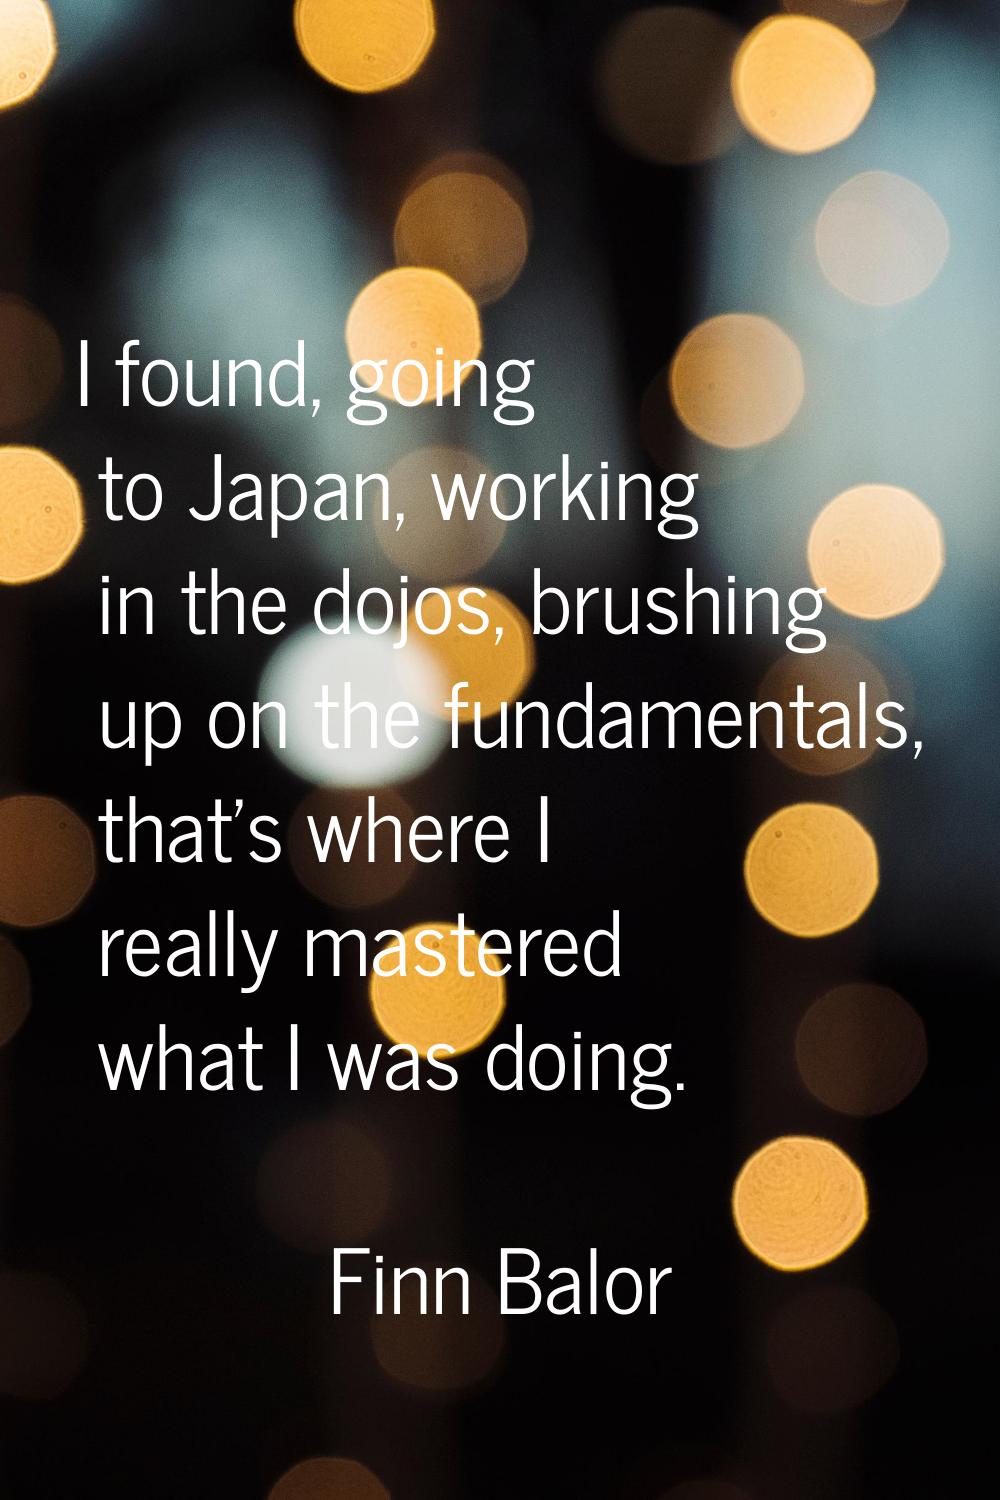 I found, going to Japan, working in the dojos, brushing up on the fundamentals, that's where I real